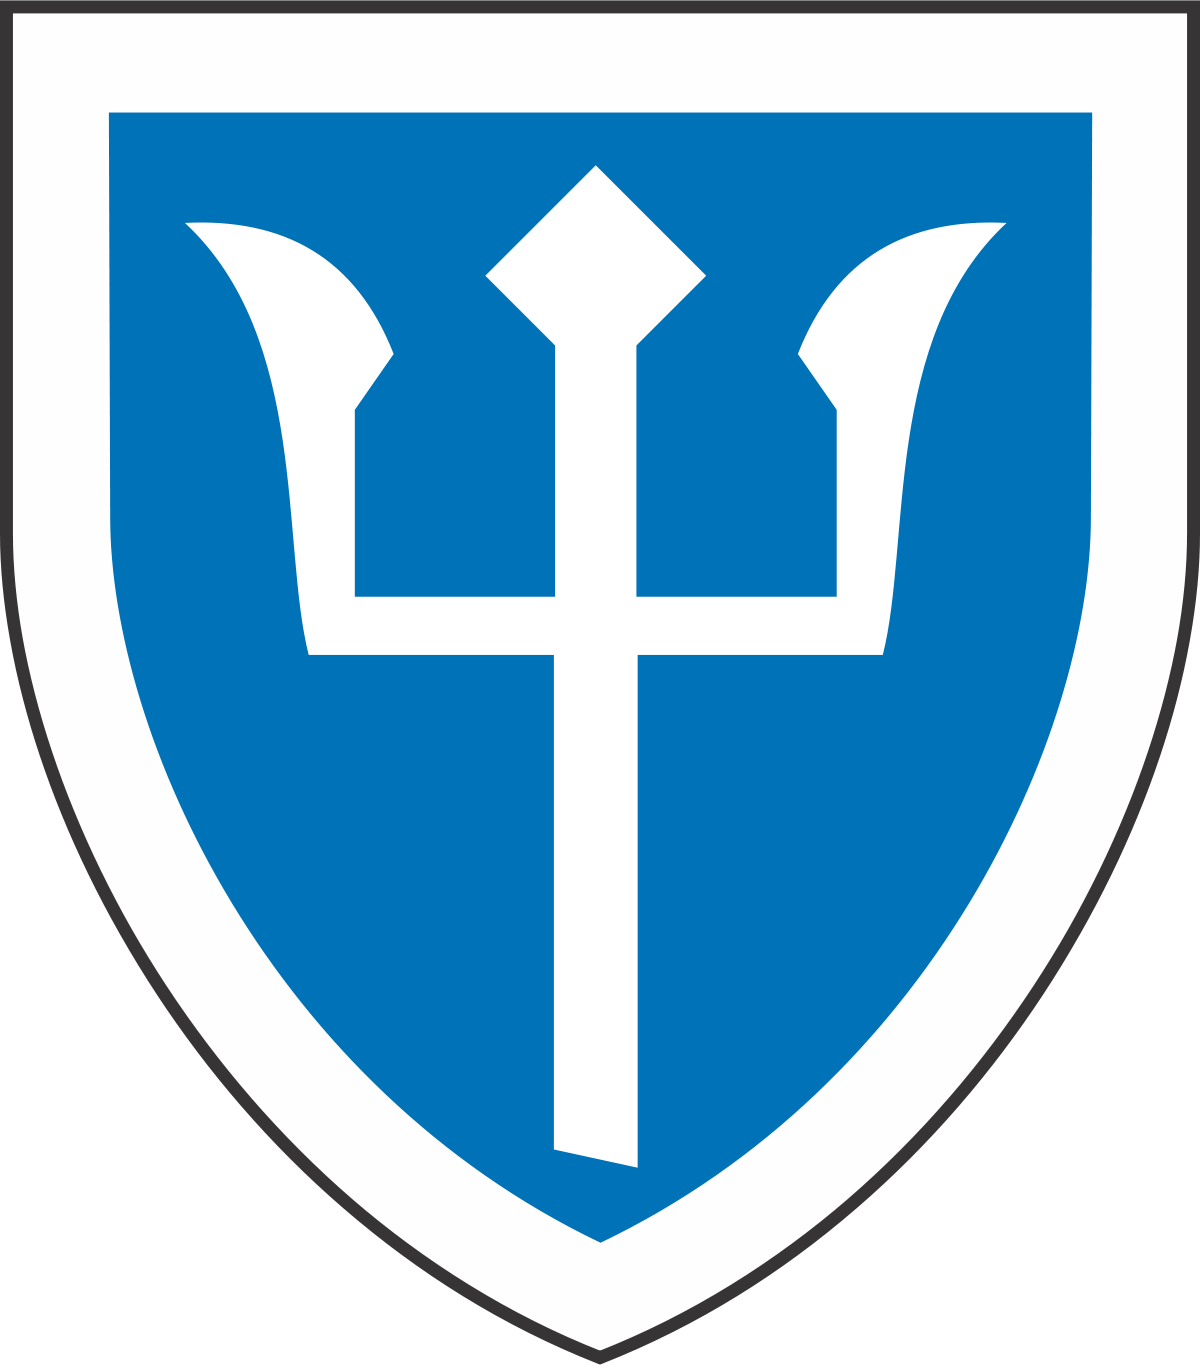 Trident Military Logo - 97th Infantry Division (United States)